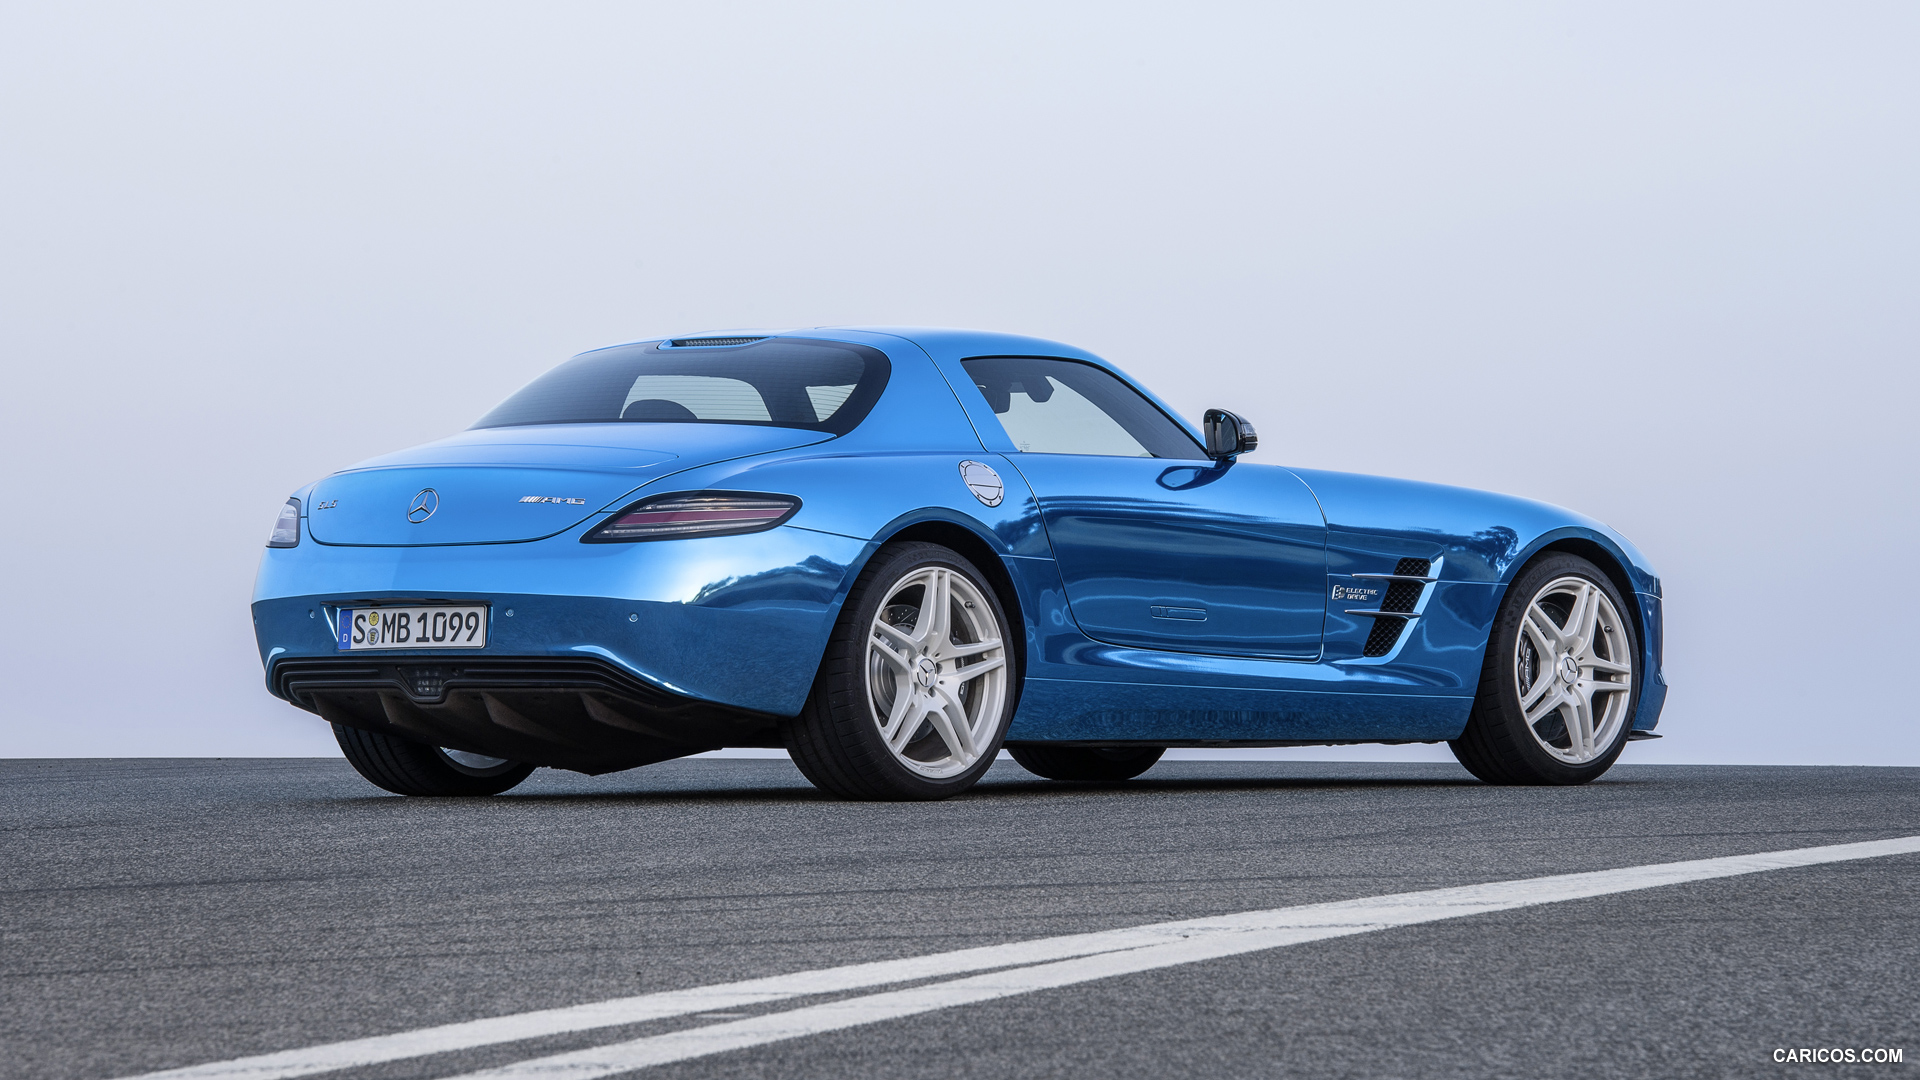 2014 Mercedes-Benz SLS AMG Coupe Electric Drive  - Rear, #14 of 47